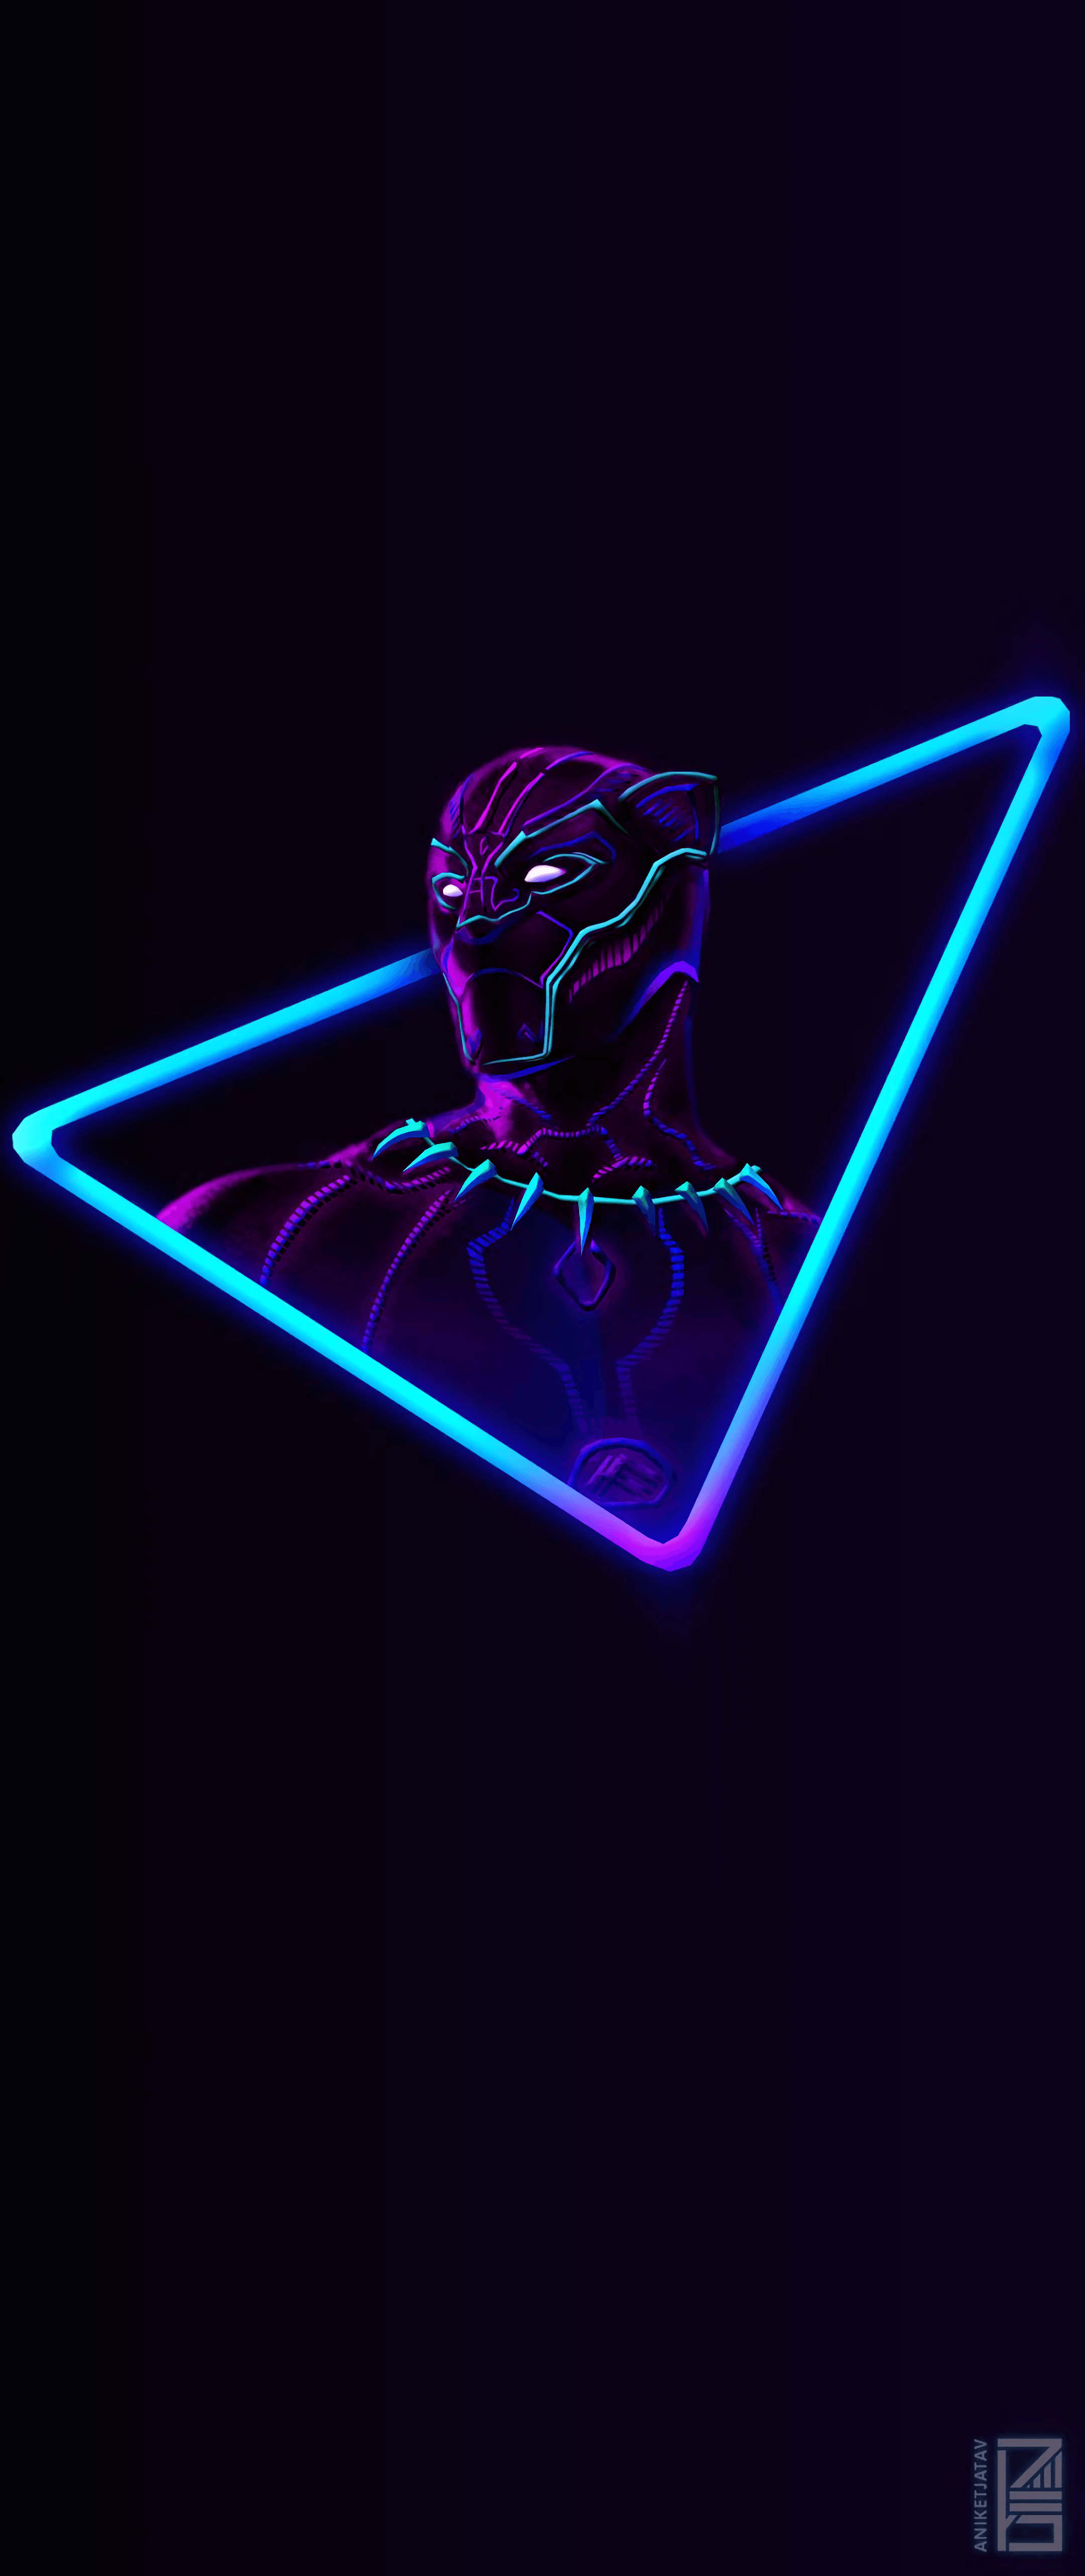 I Upscaled the Neon Black Panther artwork for phone wallpapers